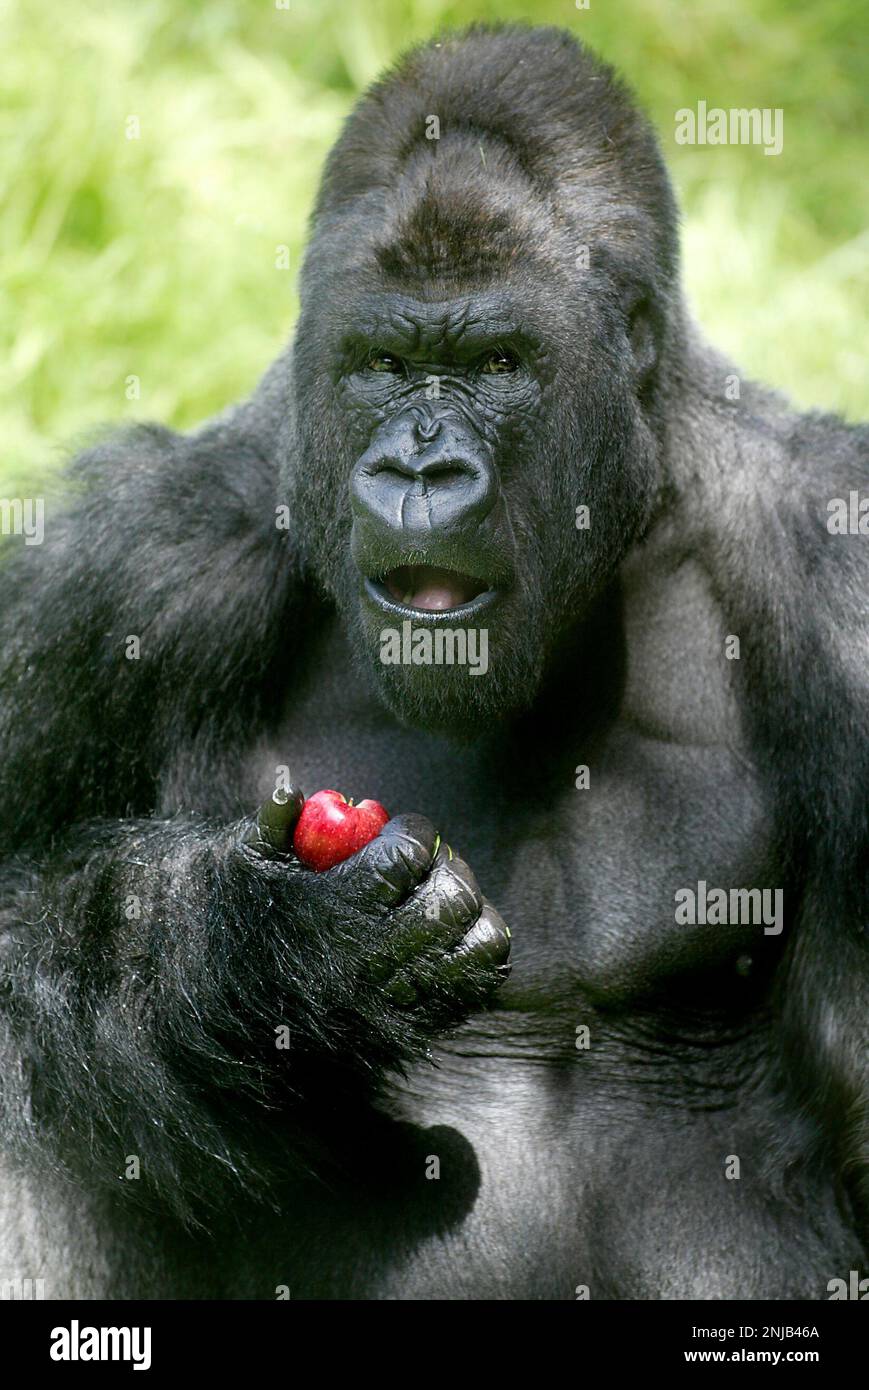 GORILLA 021 LH.jpg Kubi, a male gorilla who was born at and has